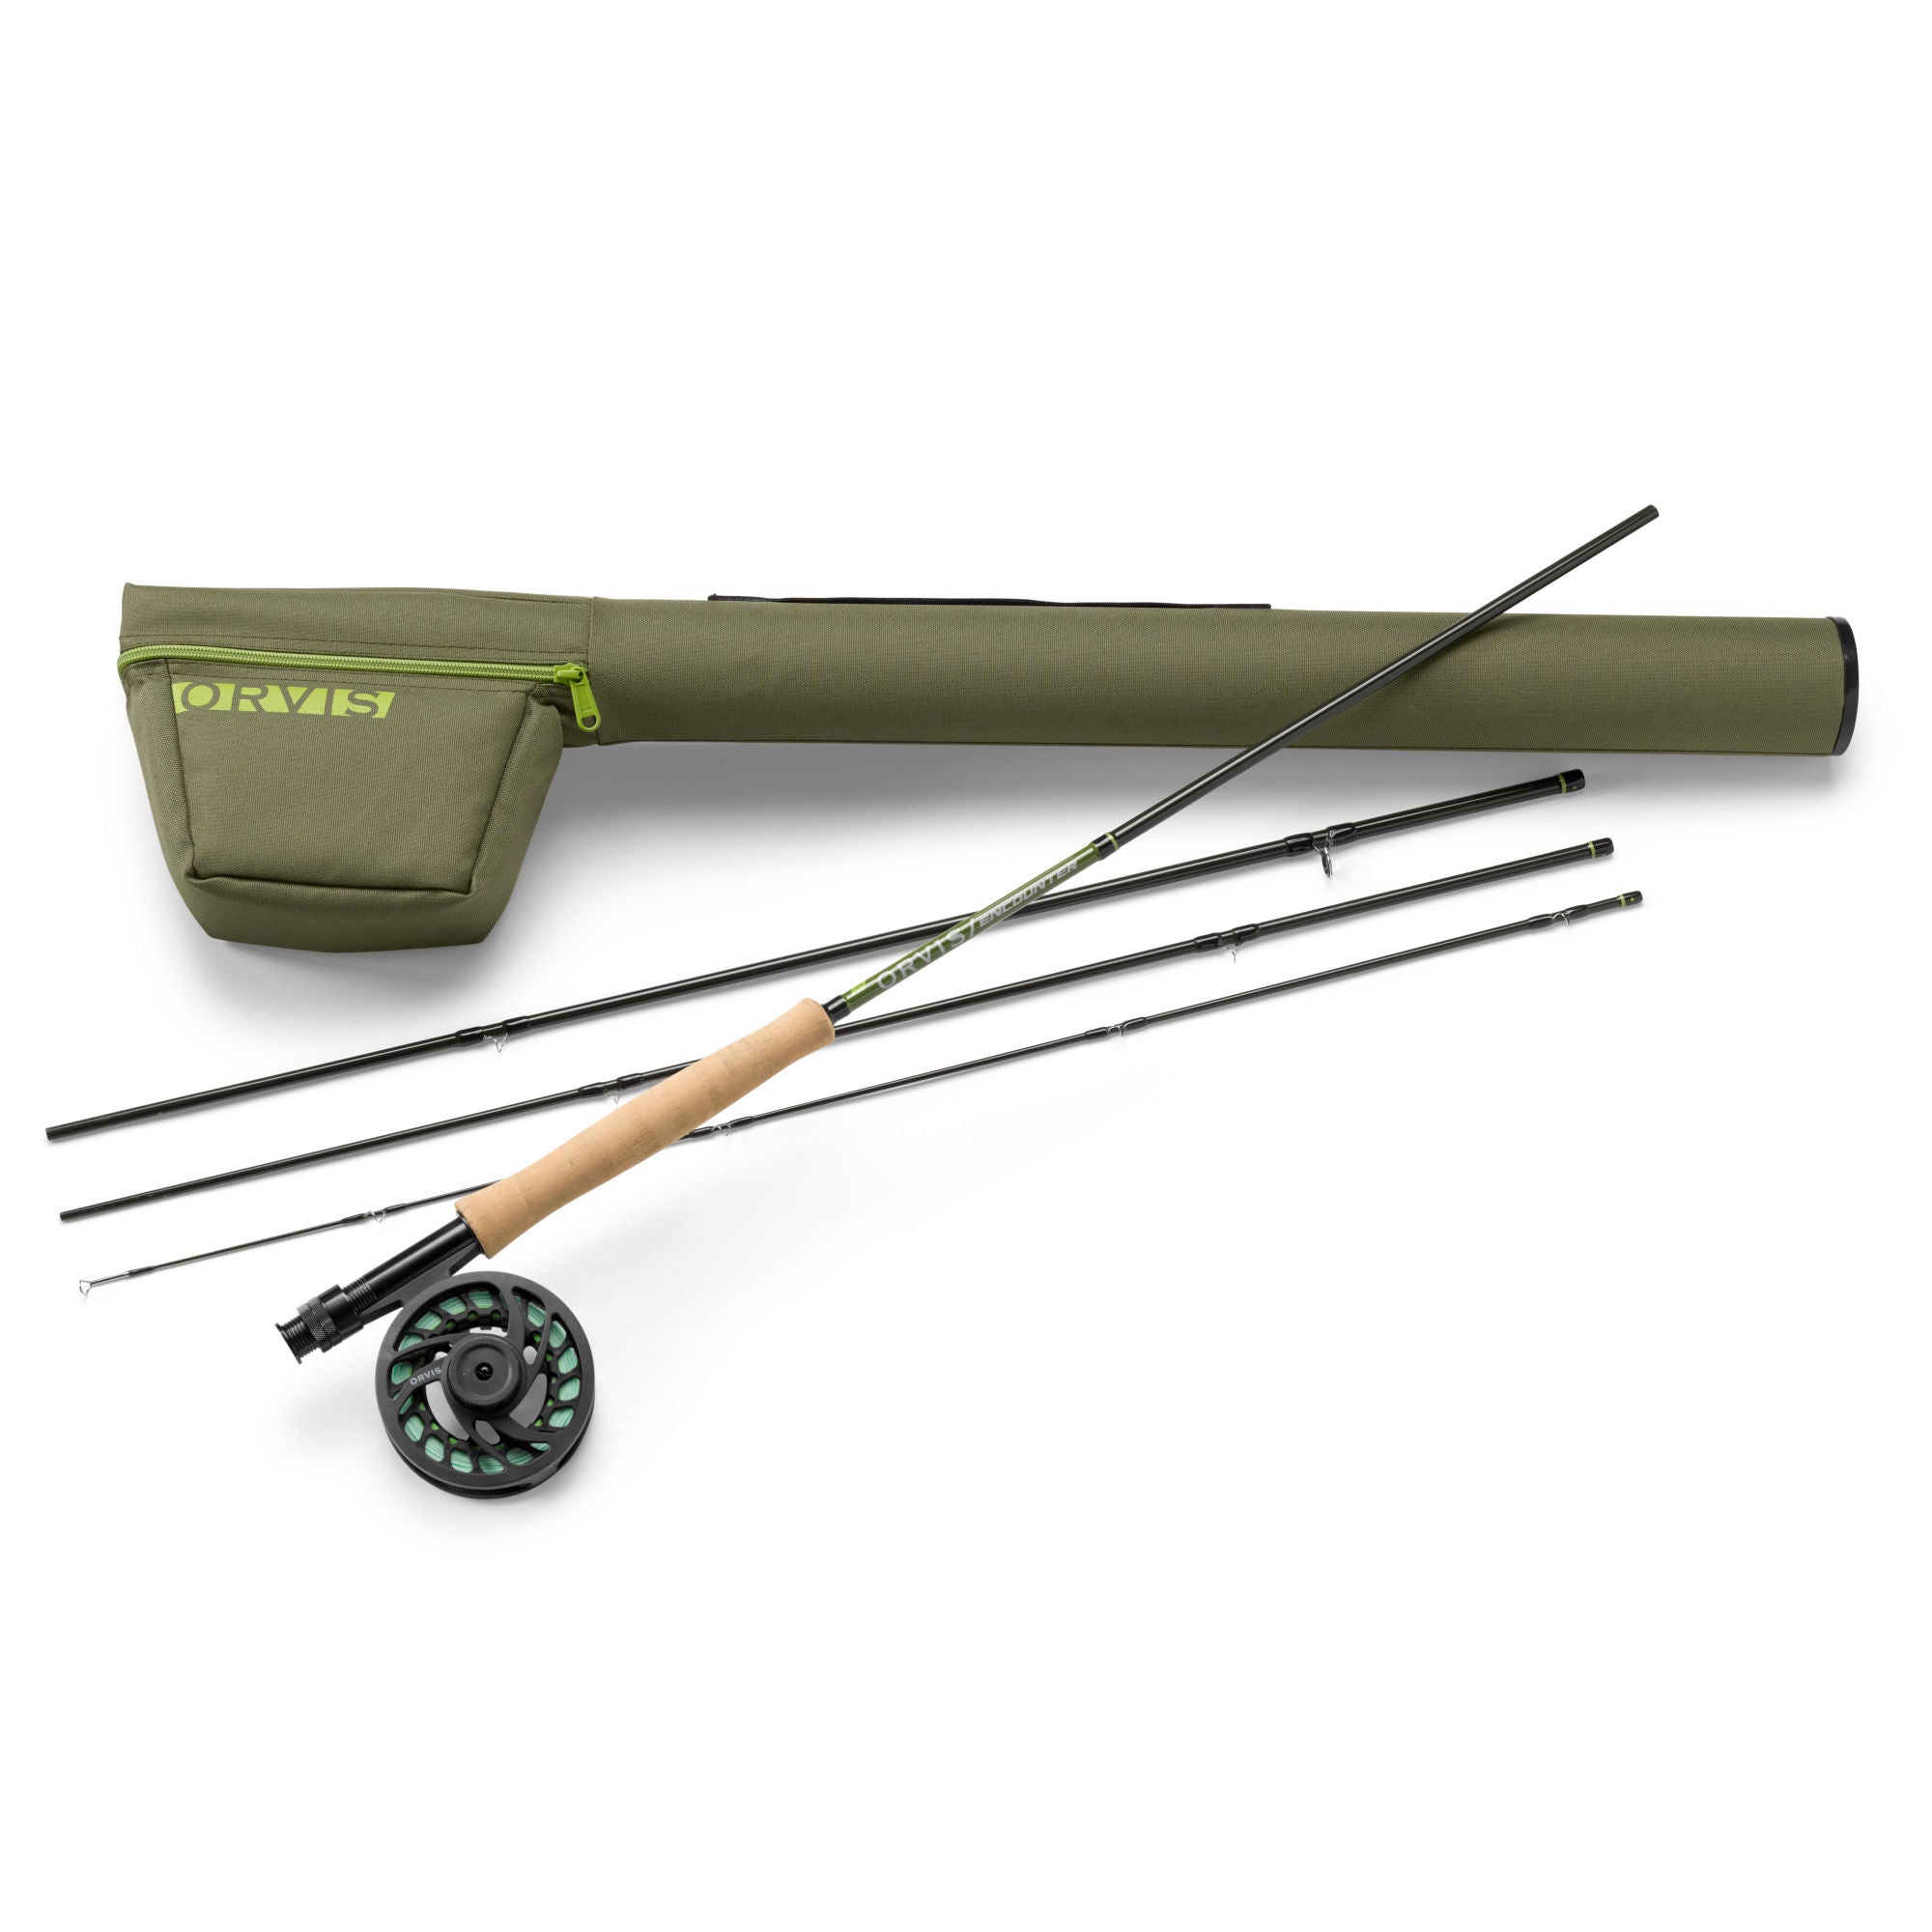 Orvis Encounter 9' Outfit – Rod & Reel Outfit